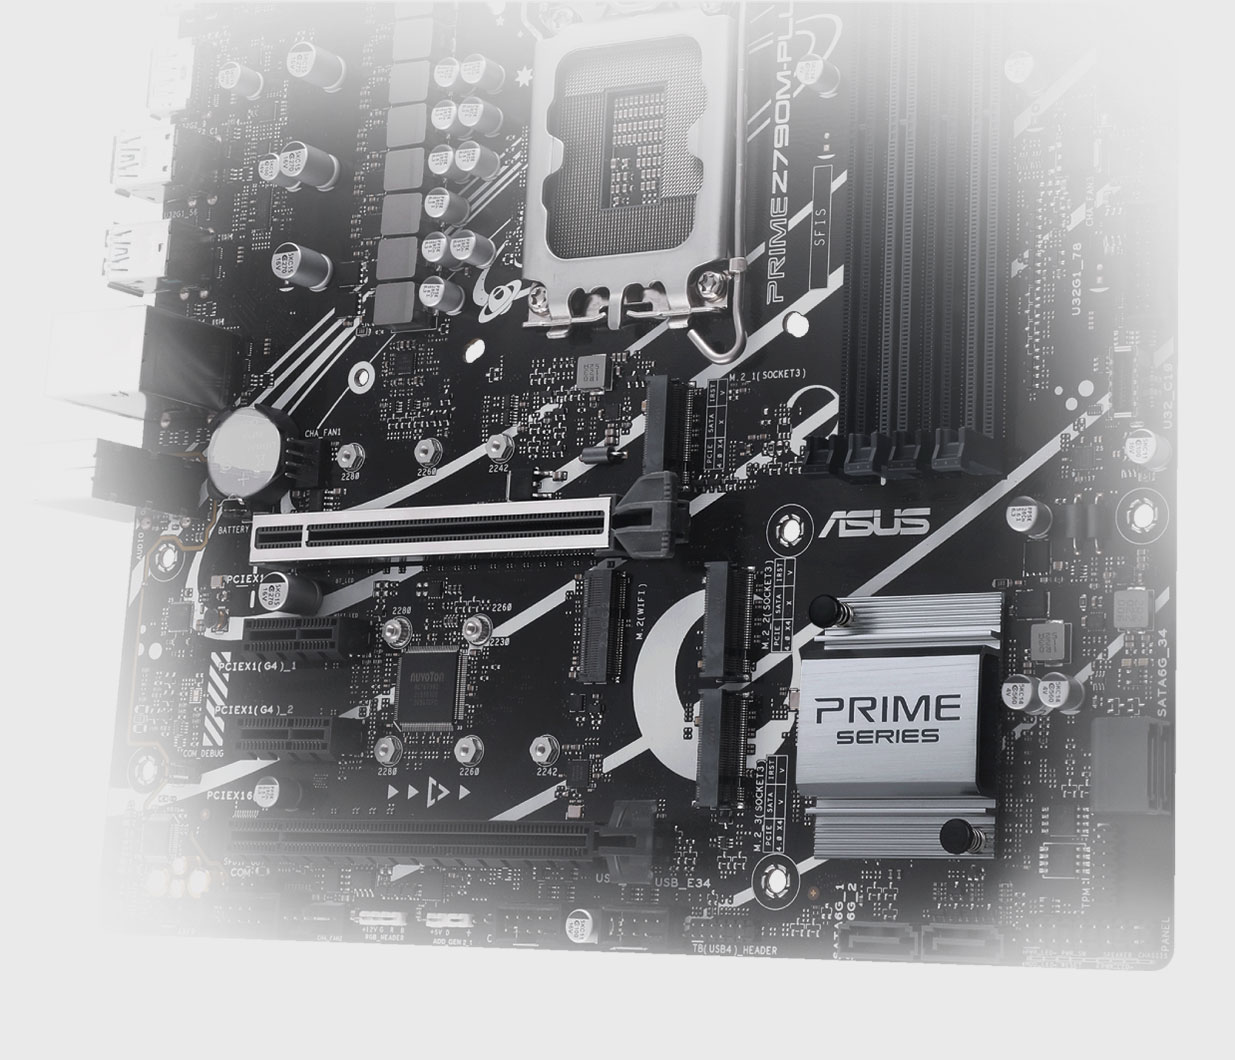 The PRIME Z790M-PLUS motherboard supports three M.2 slots.